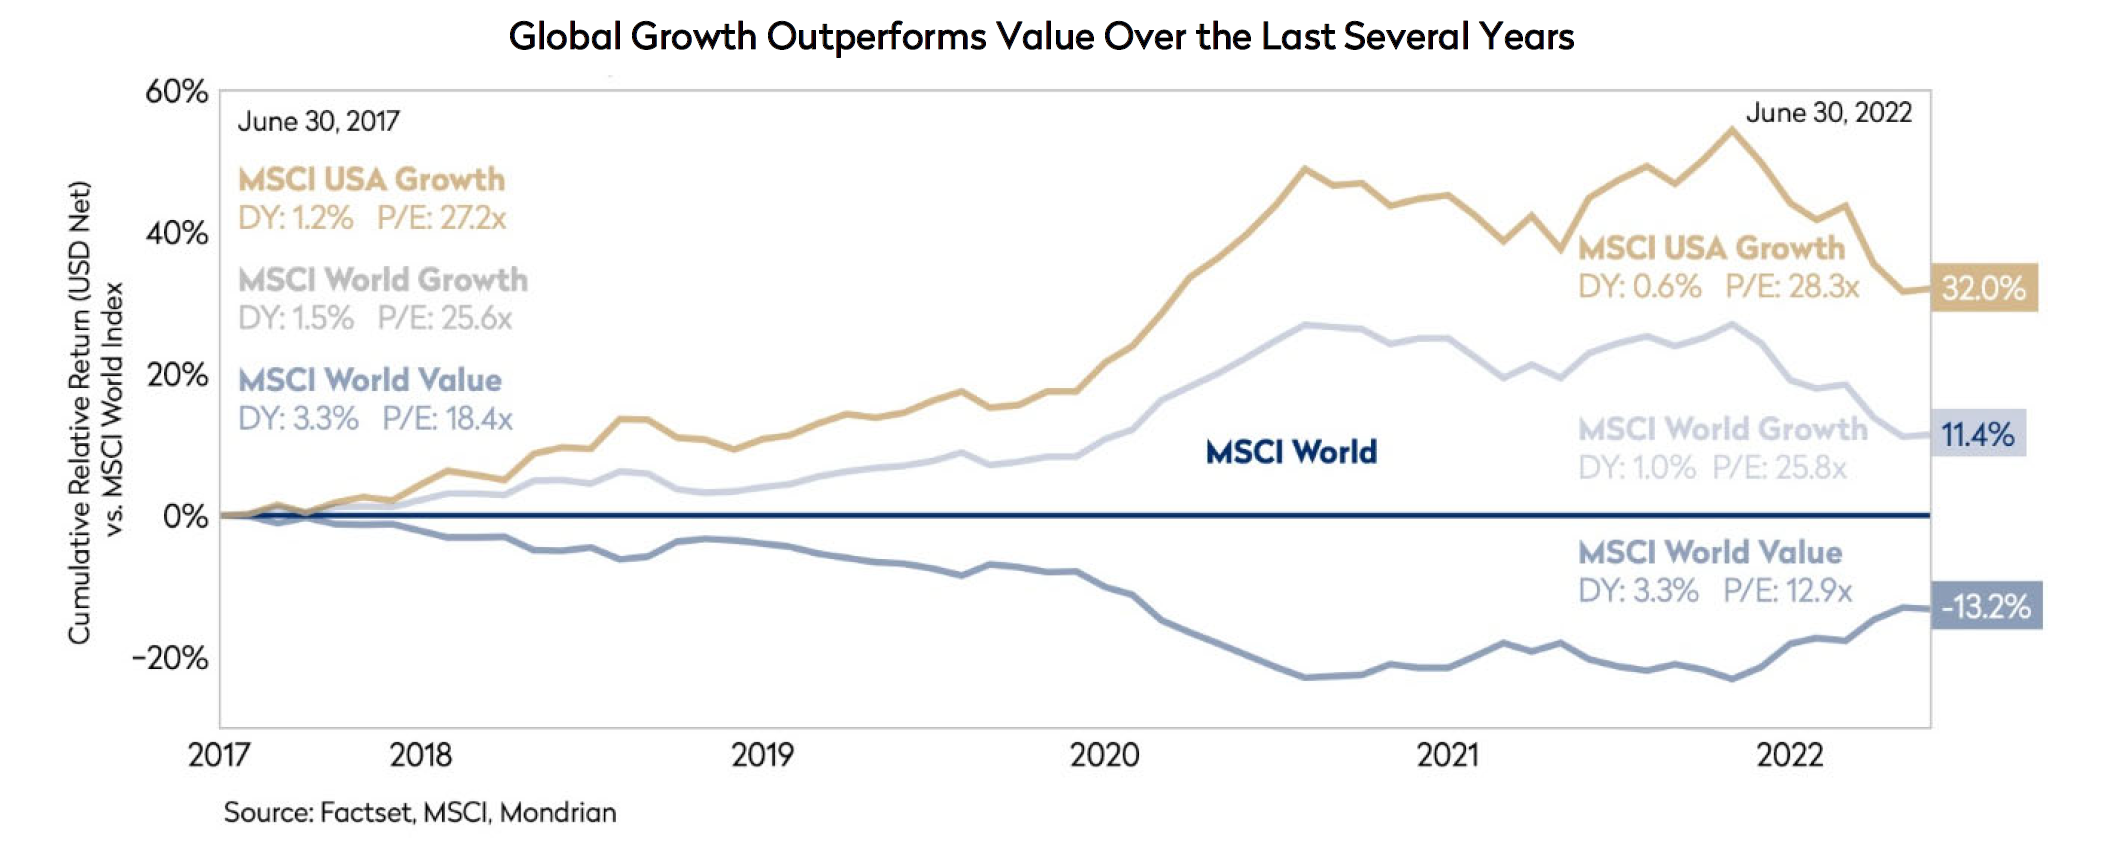 global growth has outperformed value